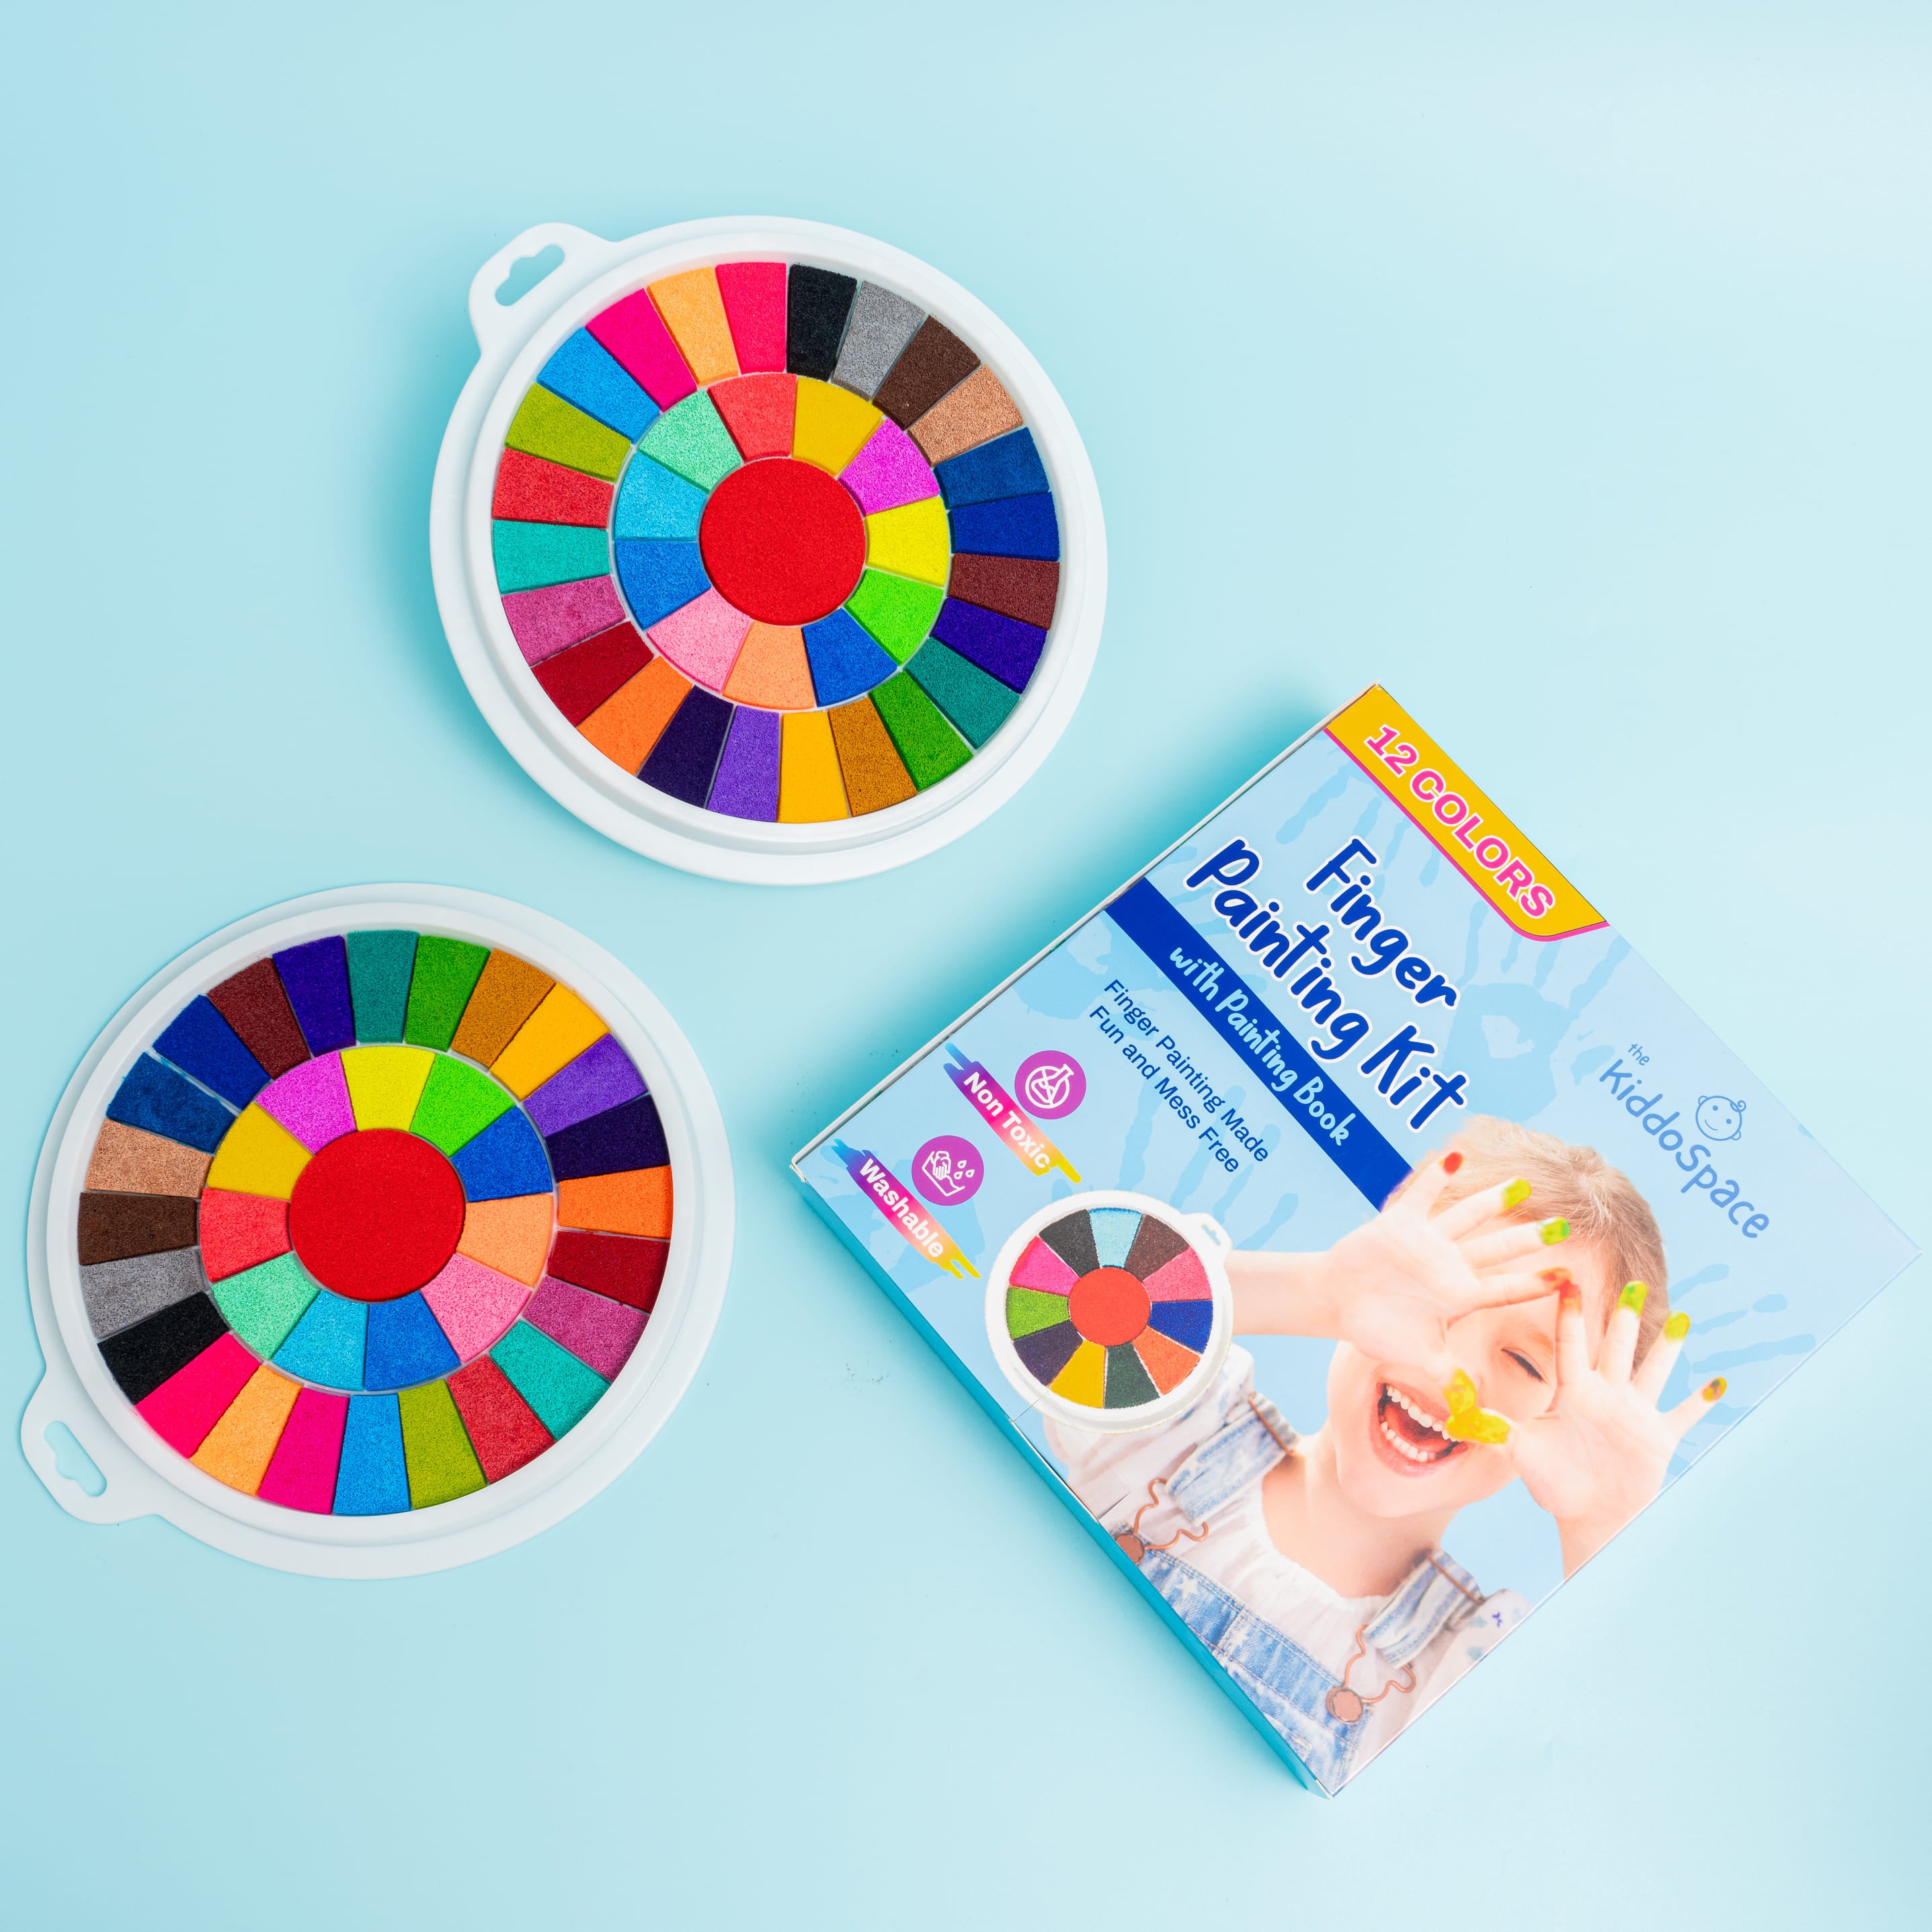 Kiddospace’s Finger Painting Kit (36 Colors)